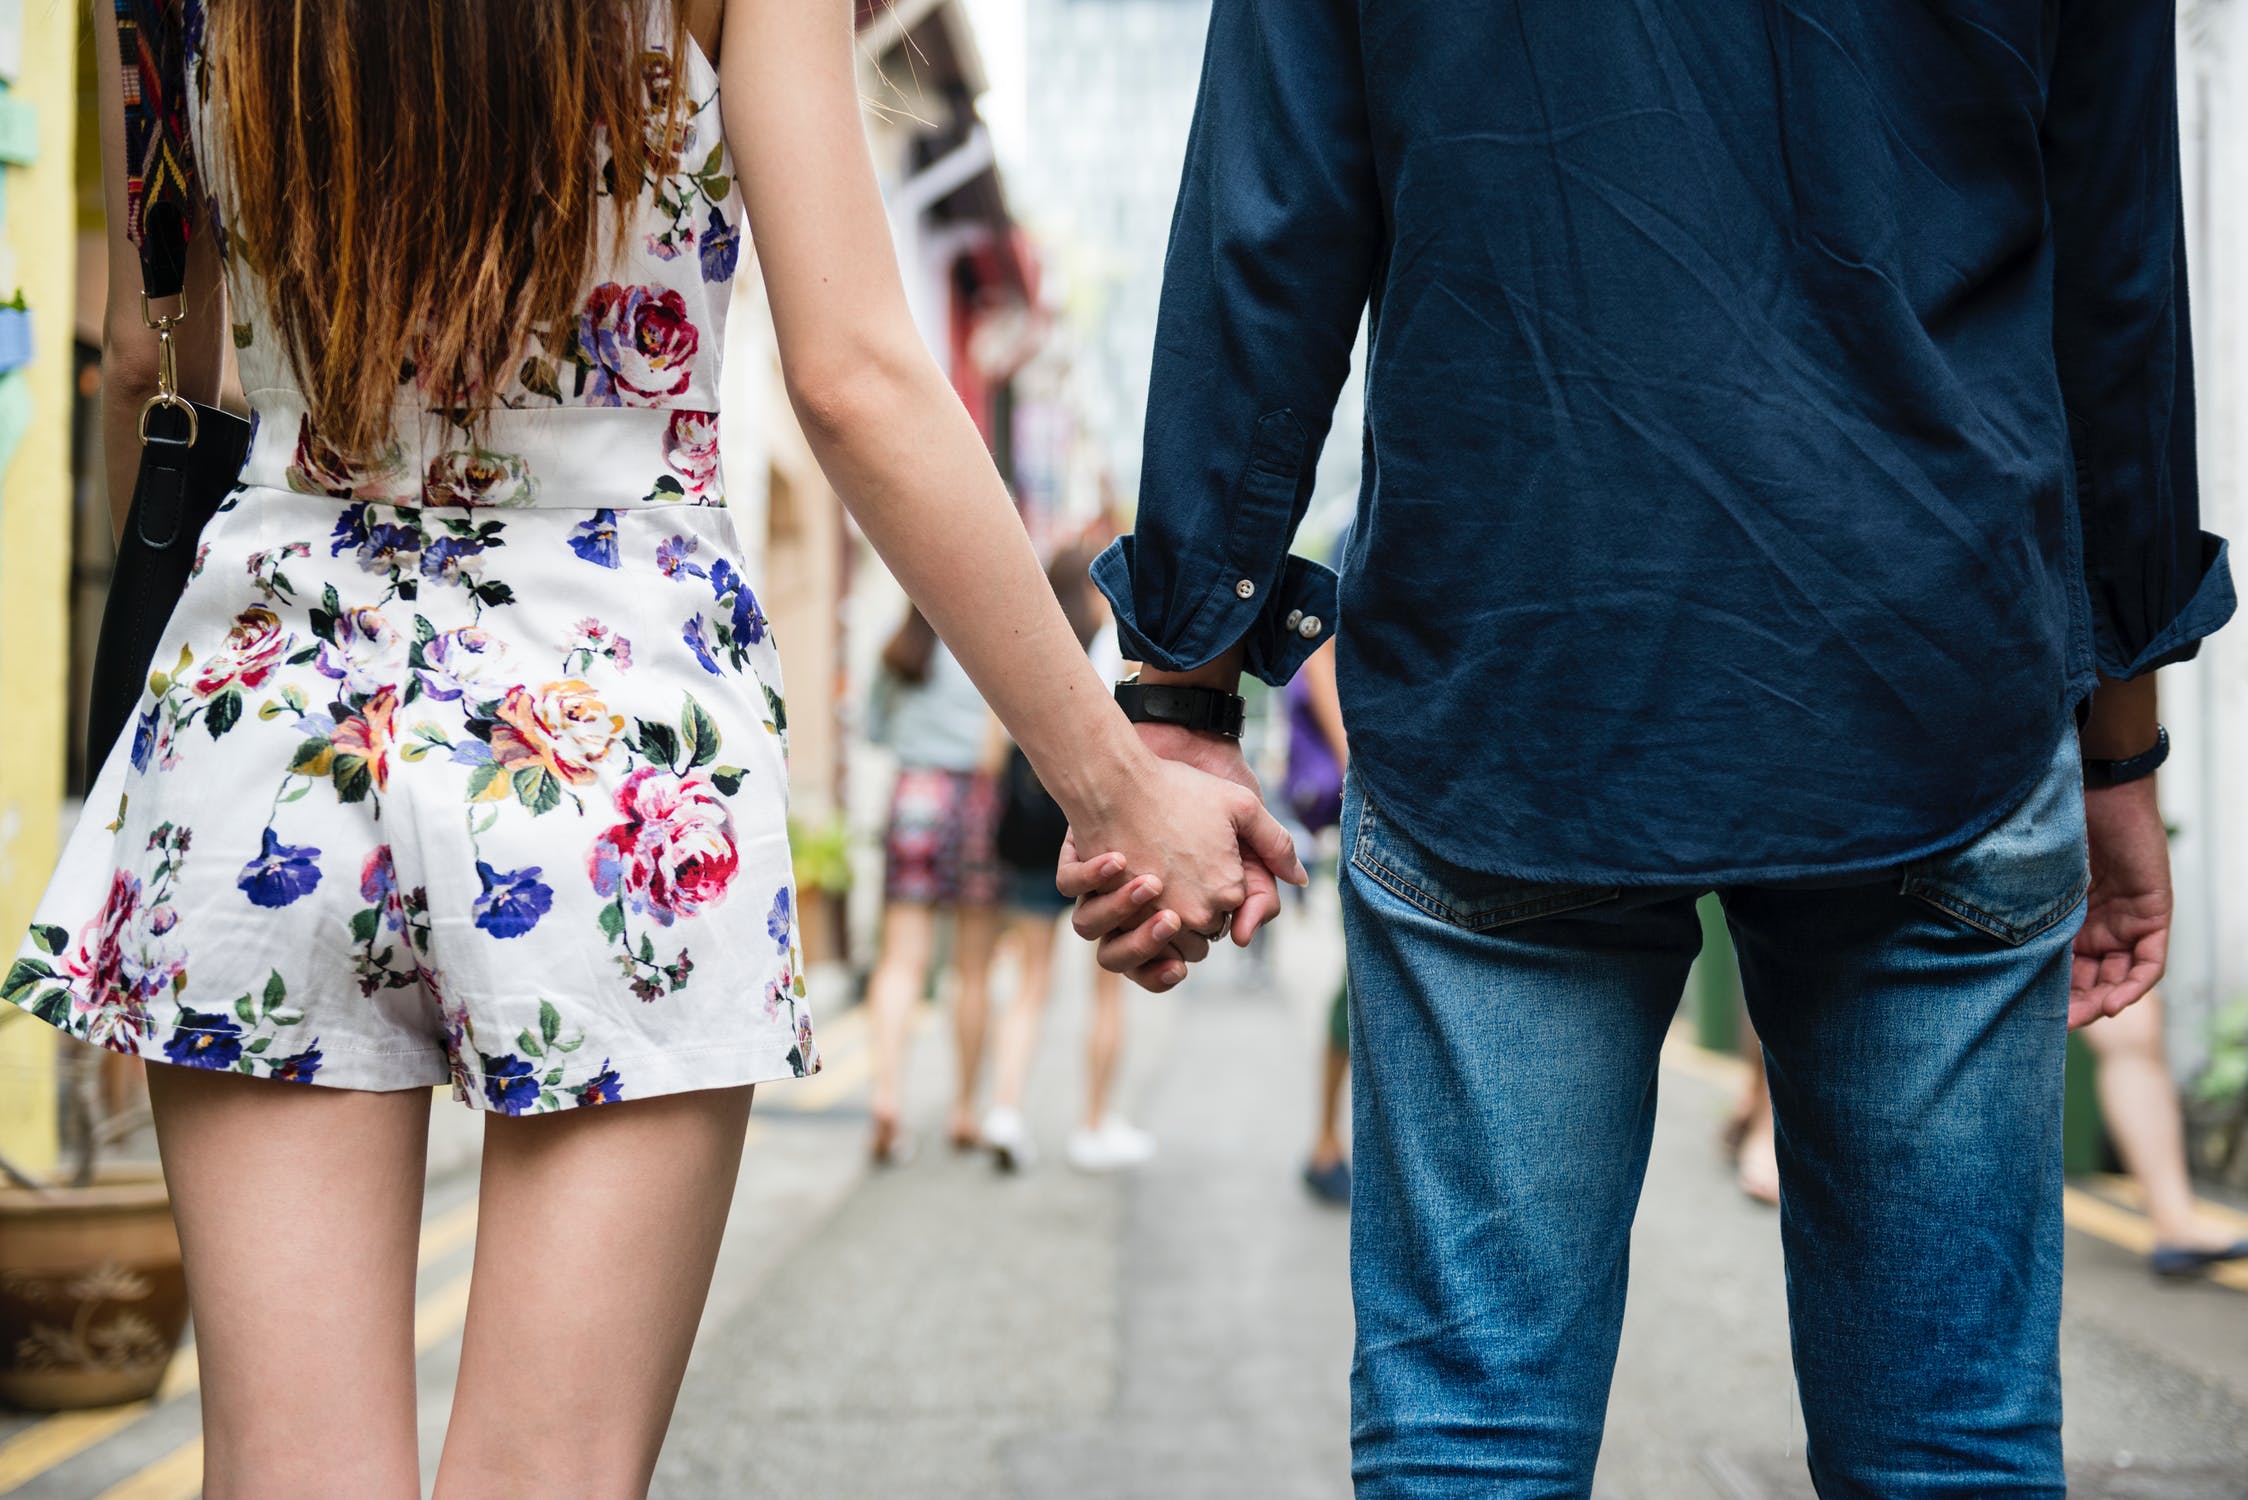 Dating in 2019: Tips for When You're Going Out With Someone You've Never Met Before 